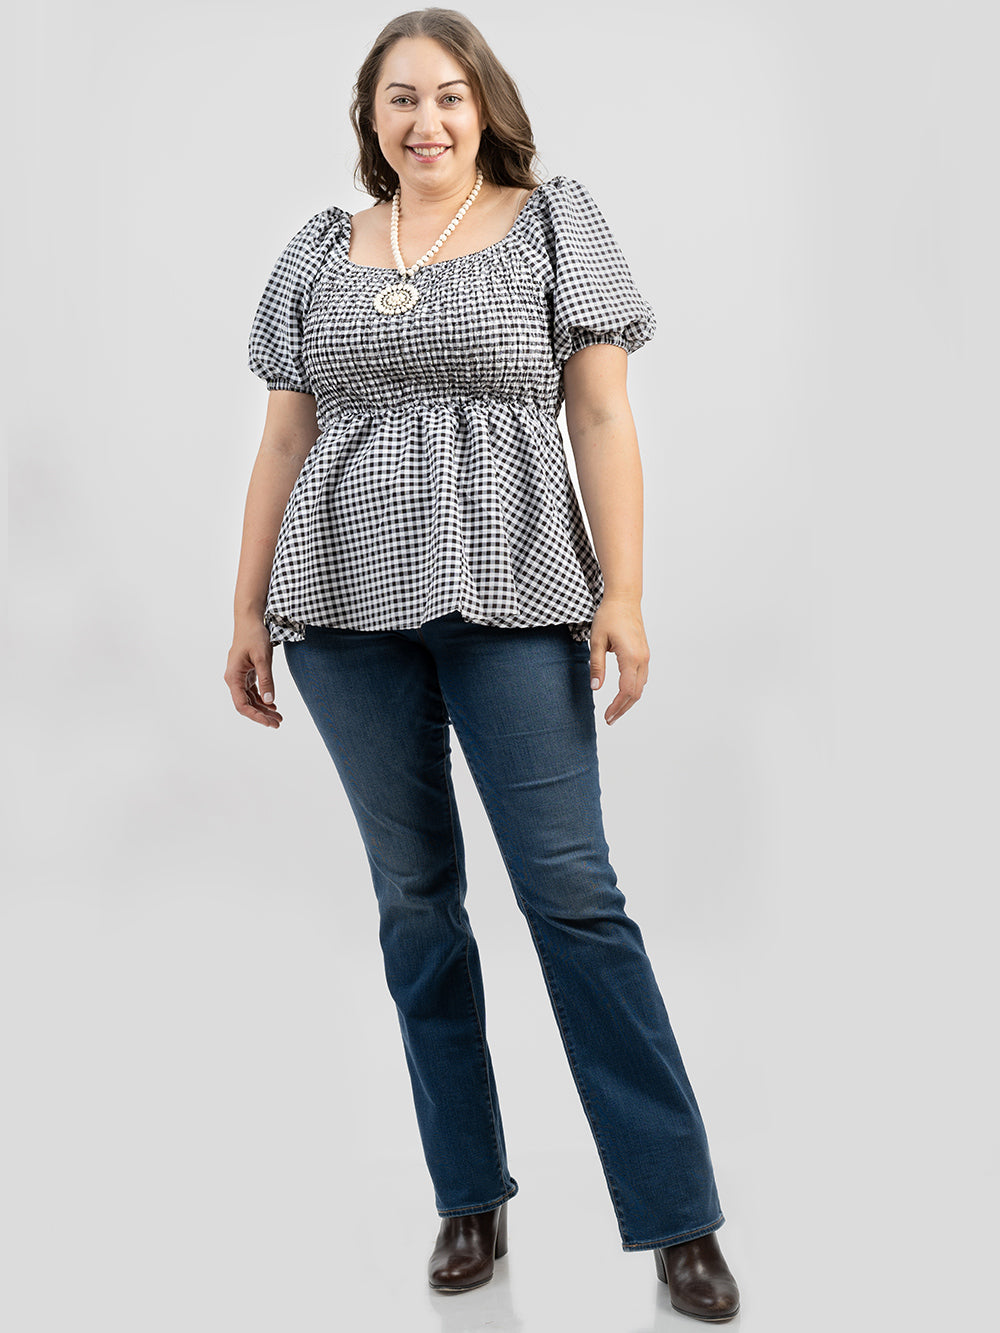 Plus Size Women's Gingham/Check Fabric Short Puff Sleeve Top - Cowgirl Wear